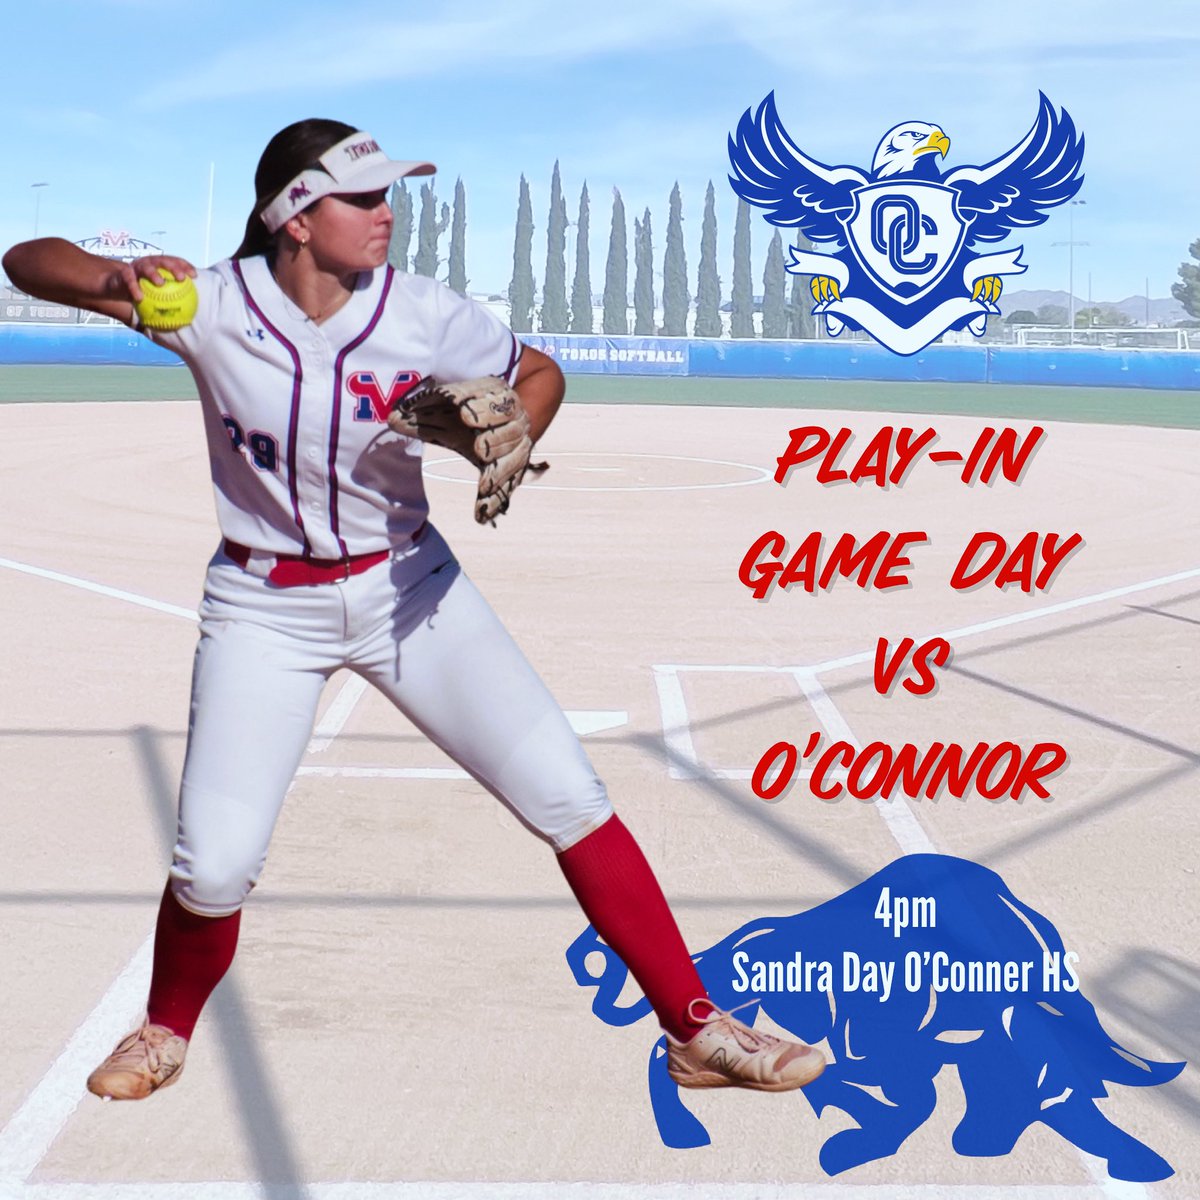 Play-In Game Day vs Sandra Day O’Conner. Game starts at 4pm. For those who cannot make it to O’Conner HS, watch our live stream on GameChanger. Let’s go bring it Toros!! #torotough🤘